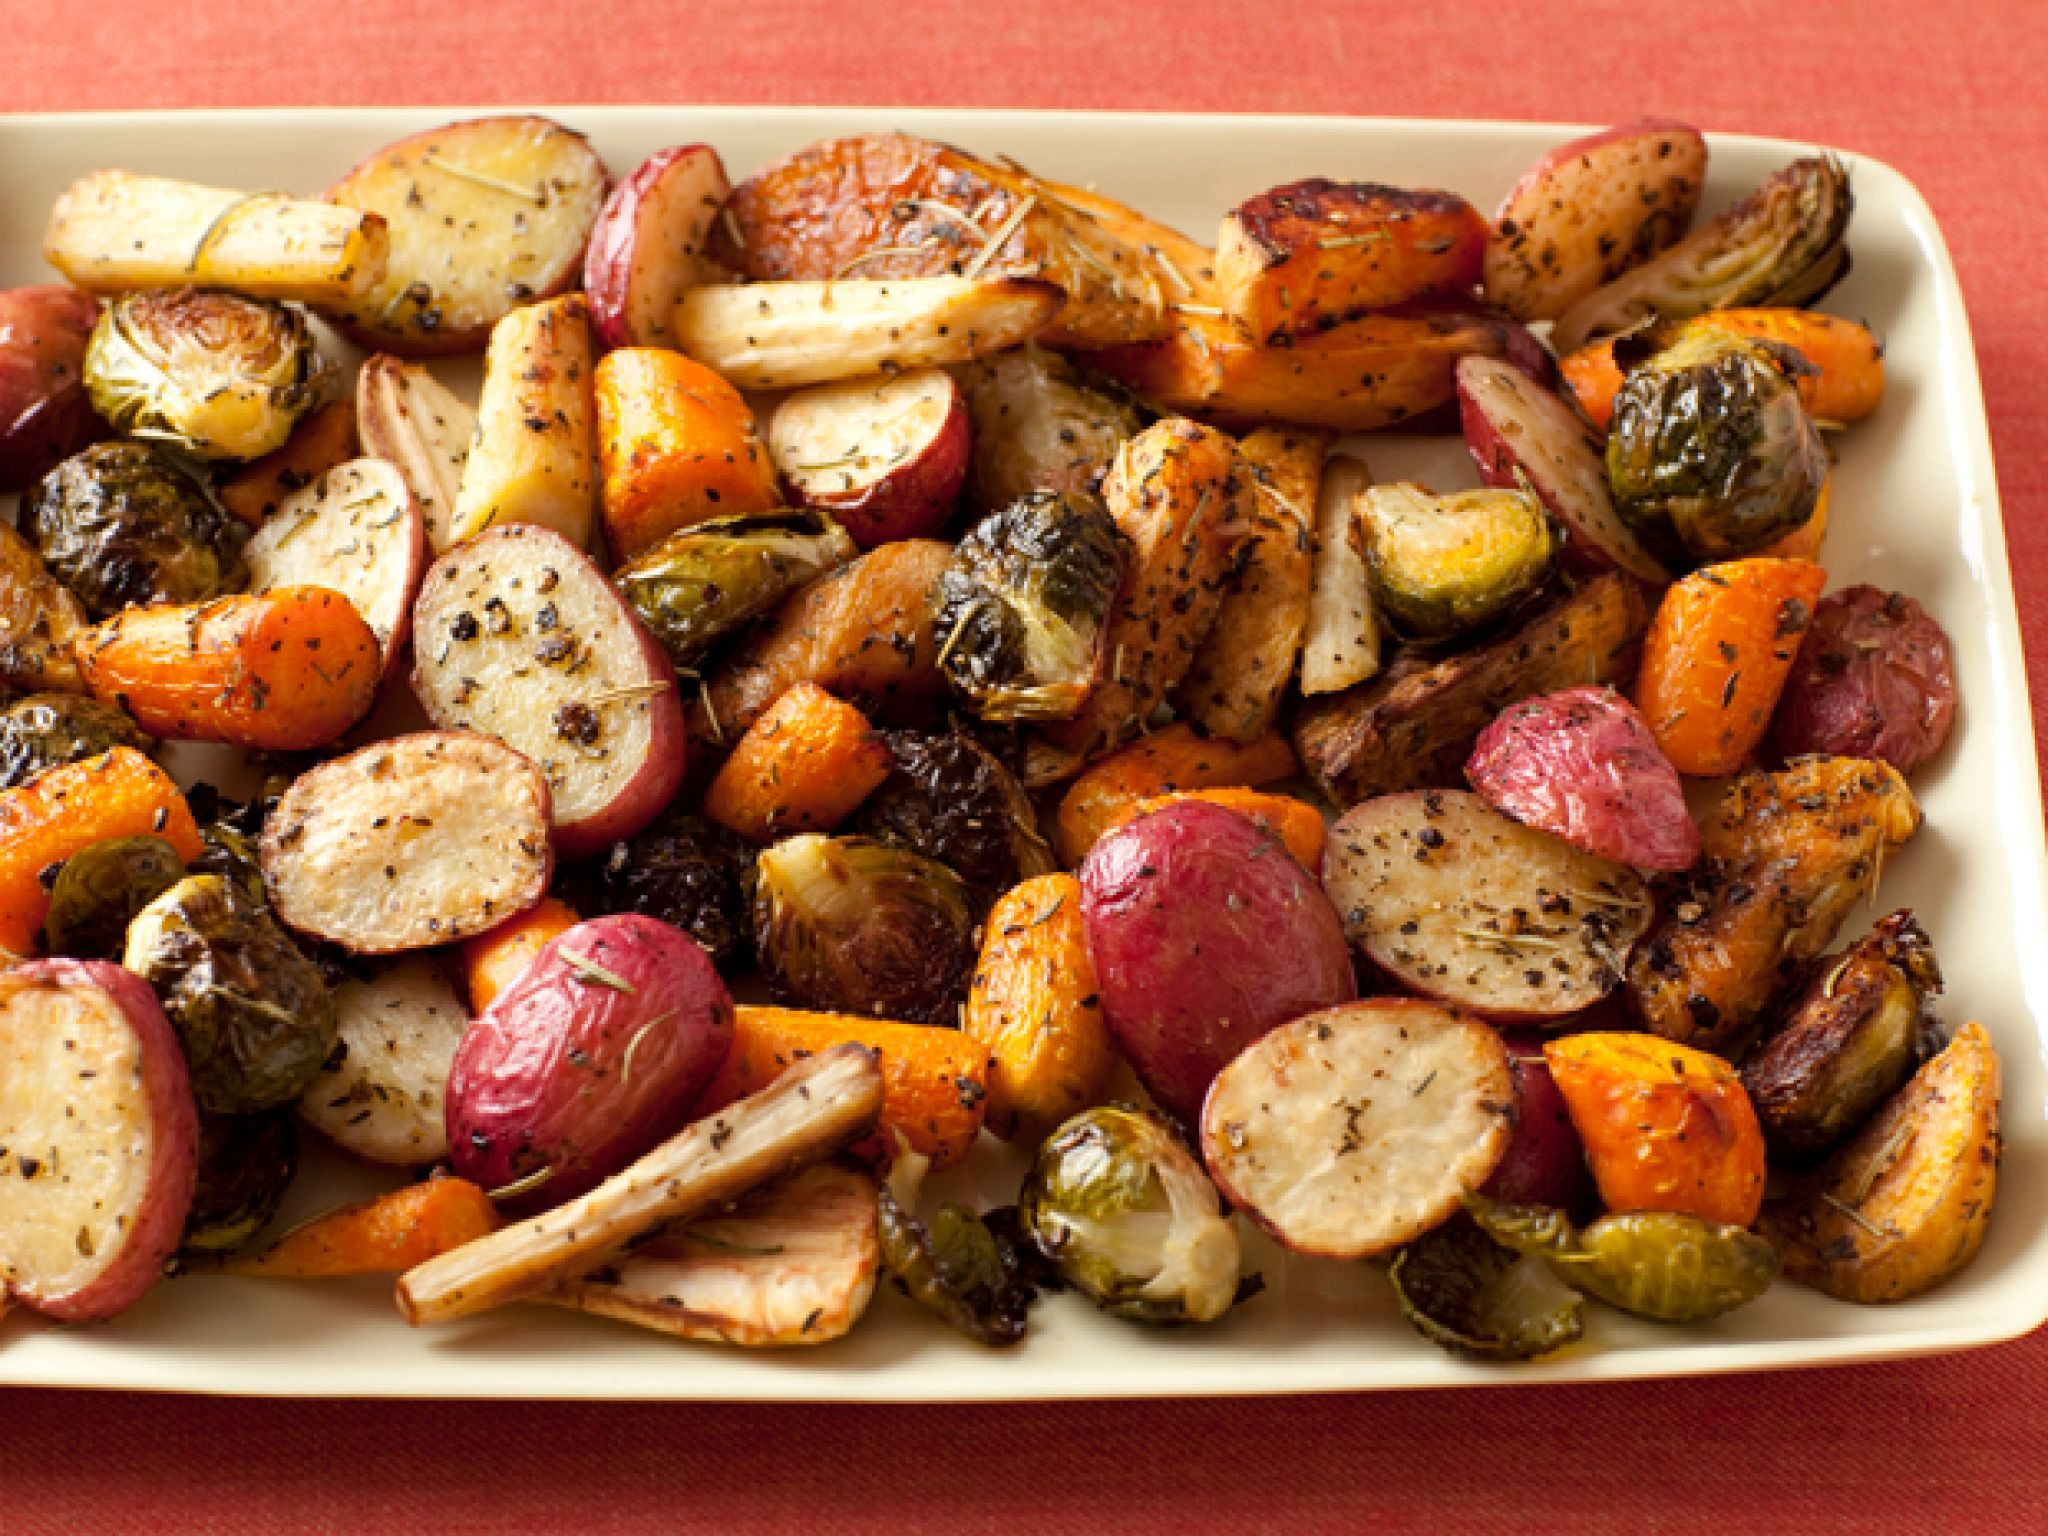 Roasted Vegetables For Thanksgiving
 100 Classic Thanksgiving Side Dish Recipes Food Network